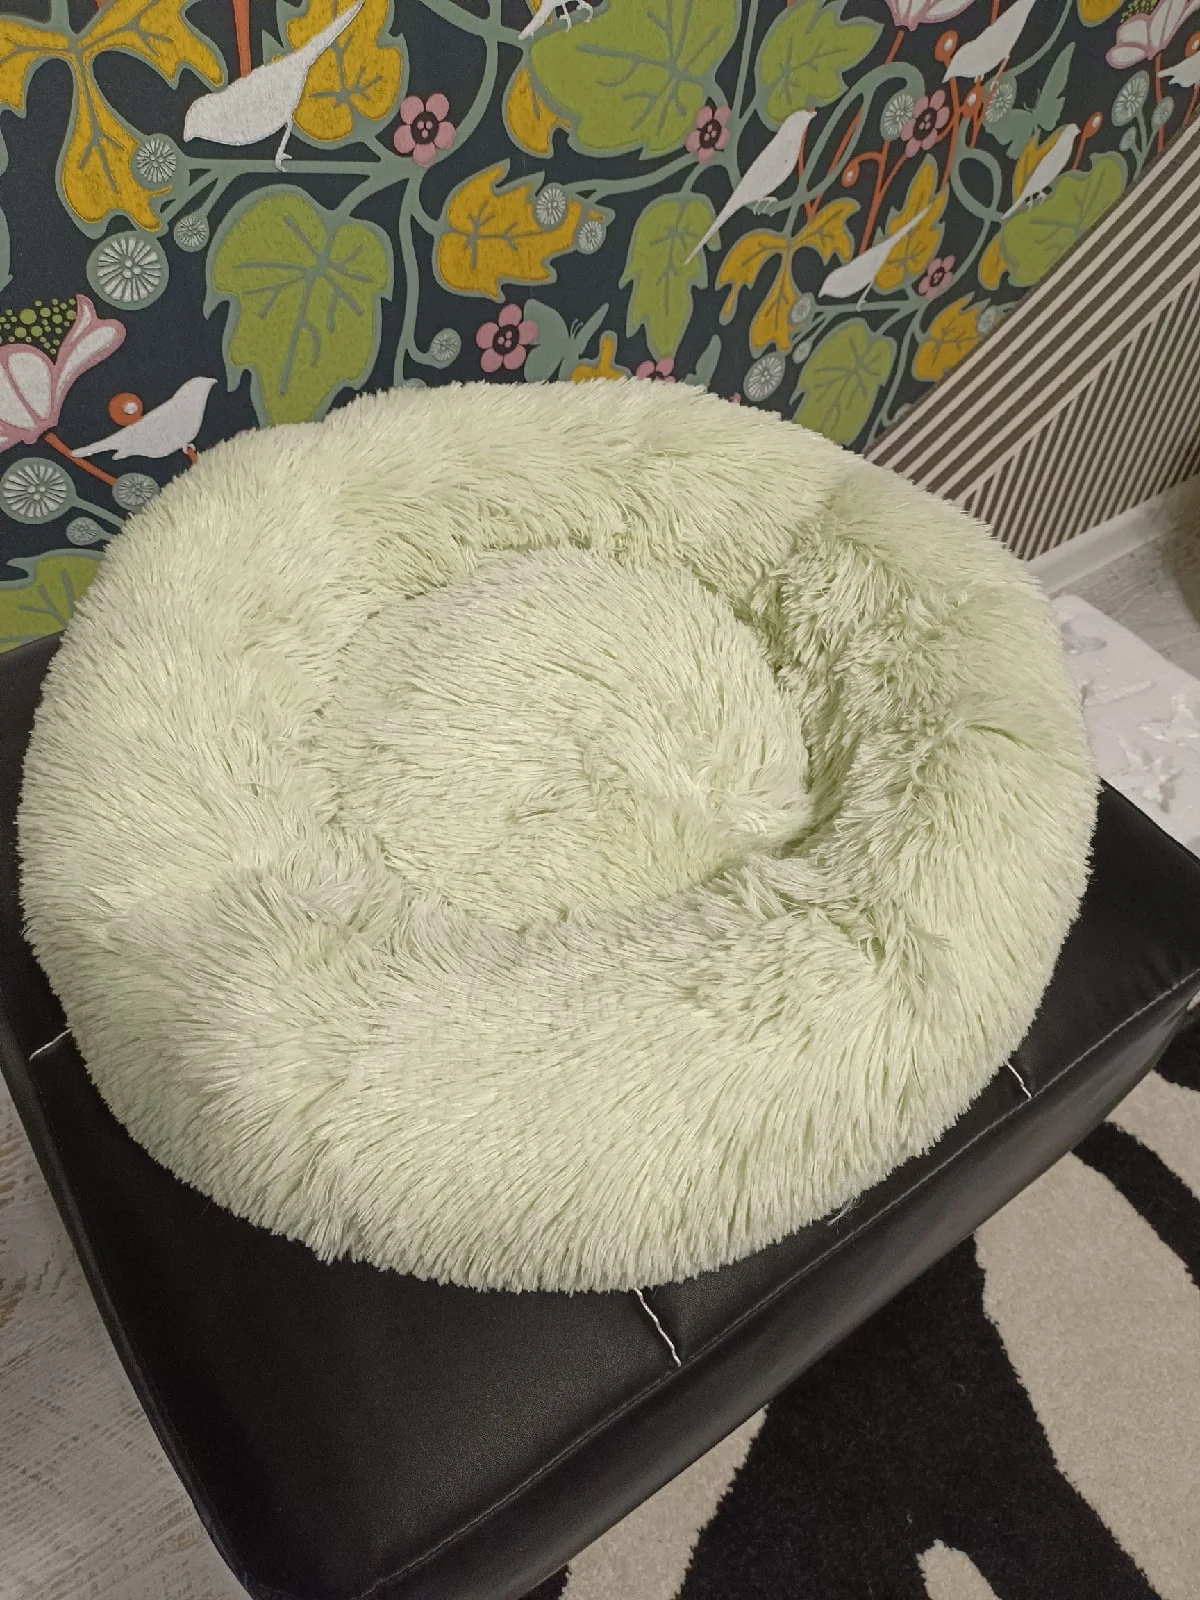 Cozy Cat Bed with Soft Cushion - Warm Pet Basket, Kitten Lounger, and Small Dog Mat Nest for Donut Round Cats Beds, Cat House Tent photo review